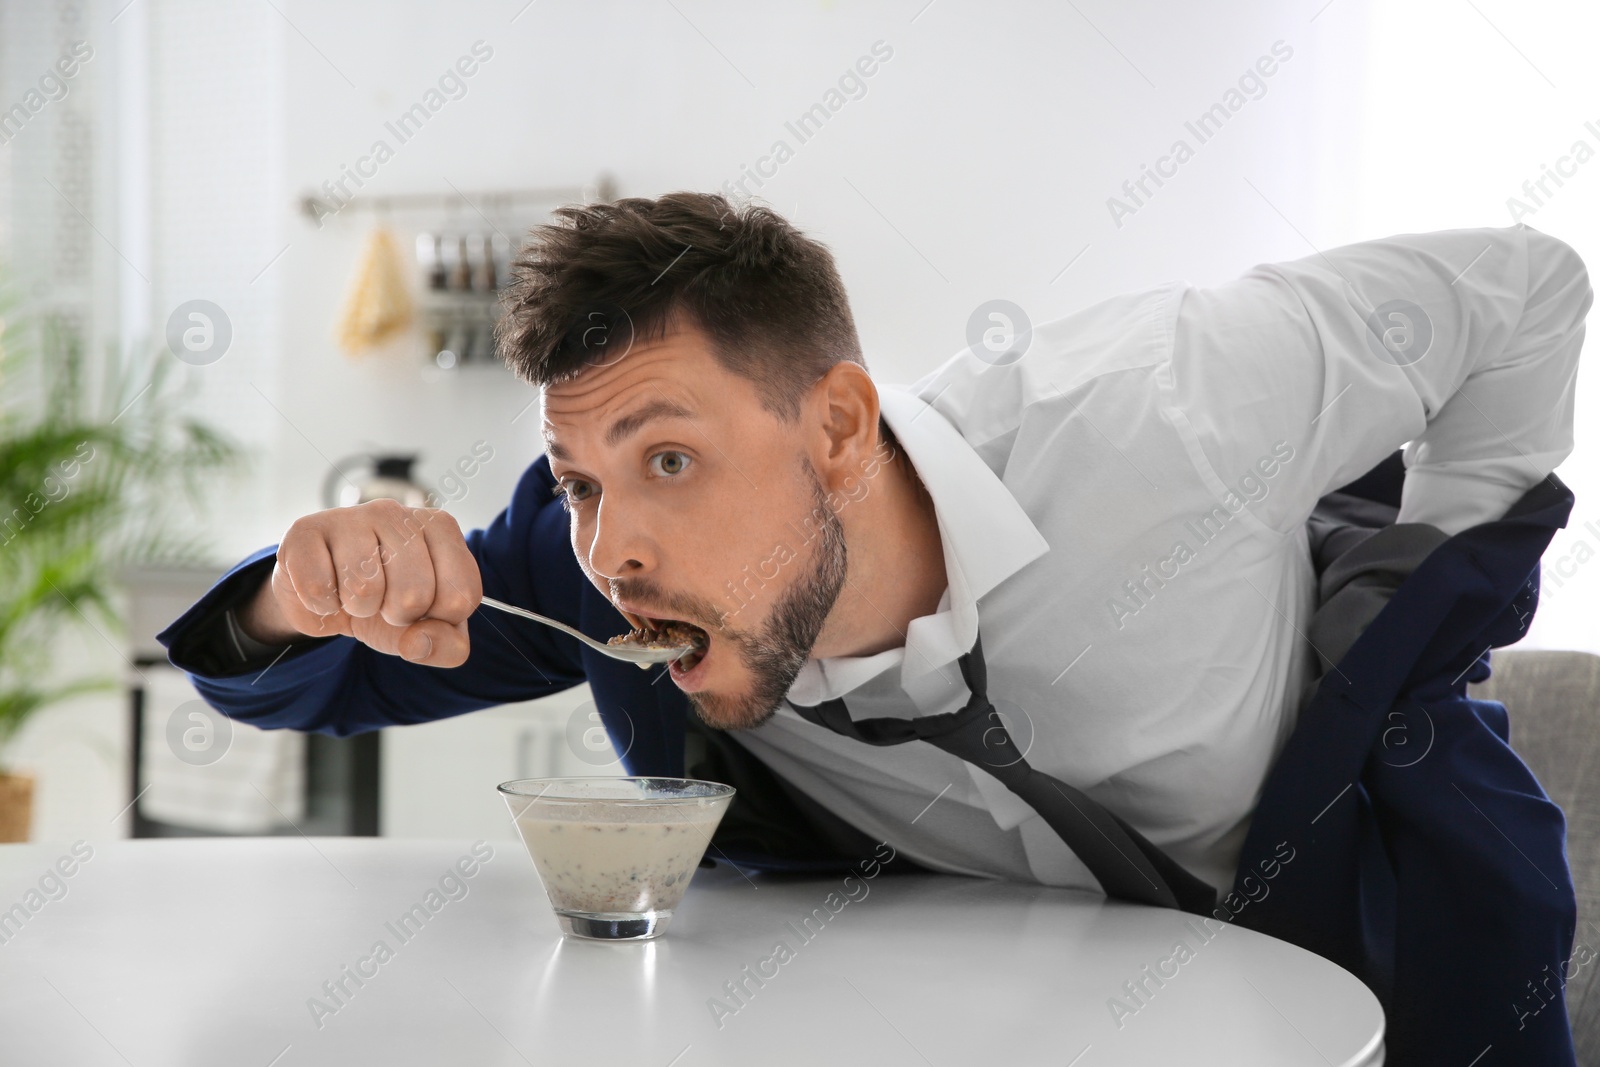 Photo of Man eating breakfast in hurry at home. Morning preparations